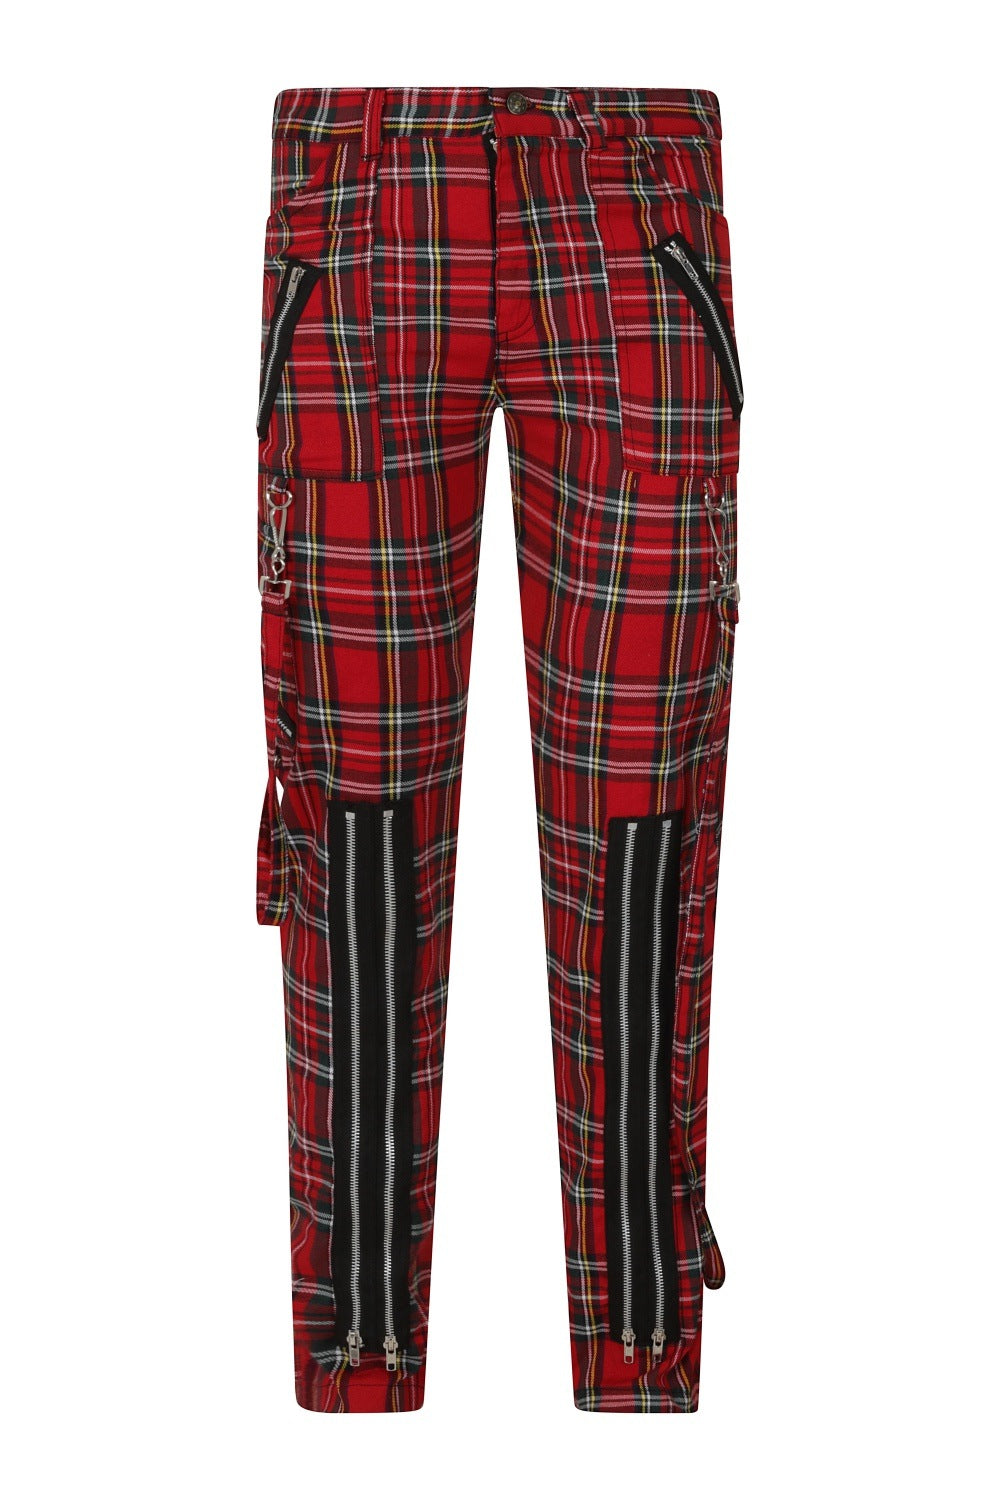 Front of red tartan trousers with strap and zip details